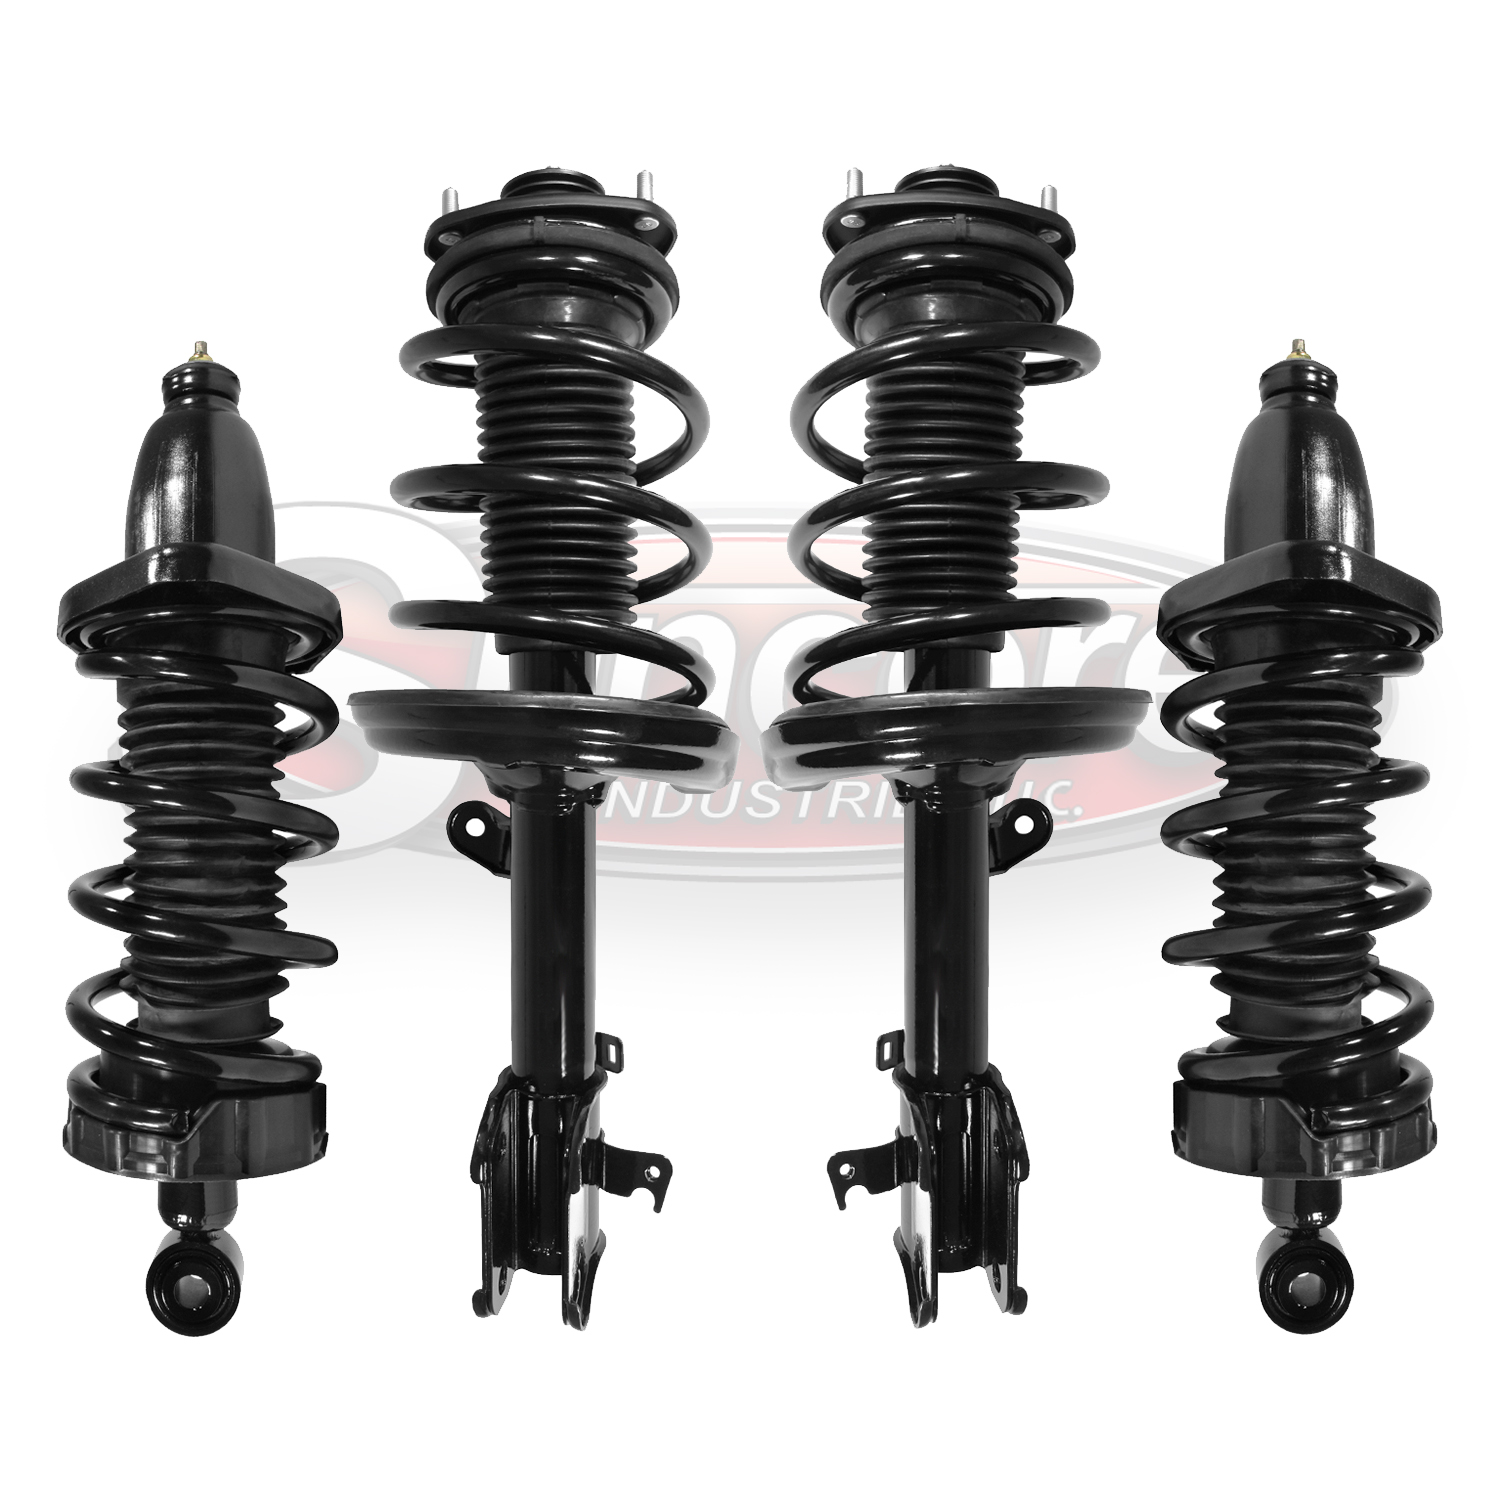 OREDY Rear Left Right Complete Shock Strut Coil Springs Assembly Kit 15124 15123 1345417R 1345417L 9213-0117 9213-0116 Compatible with Honda Ridgeline AWD 2006 2007 2008 2009 2010 2011 2012 2013 2014 